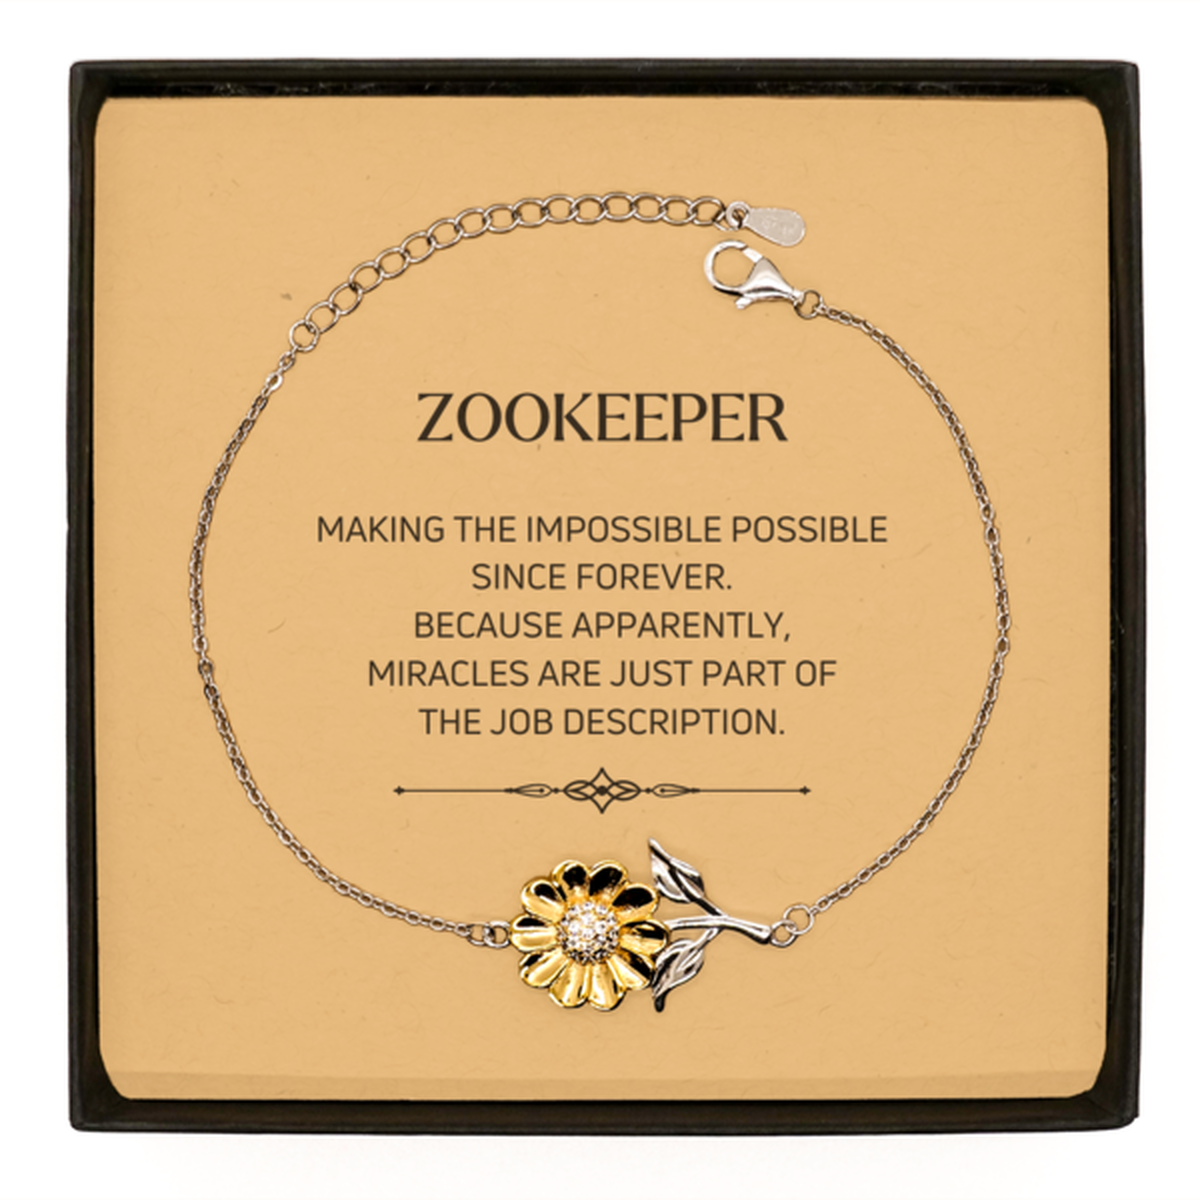 Funny Zookeeper Gifts, Miracles are just part of the job description, Inspirational Birthday Sunflower Bracelet For Zookeeper, Men, Women, Coworkers, Friends, Boss